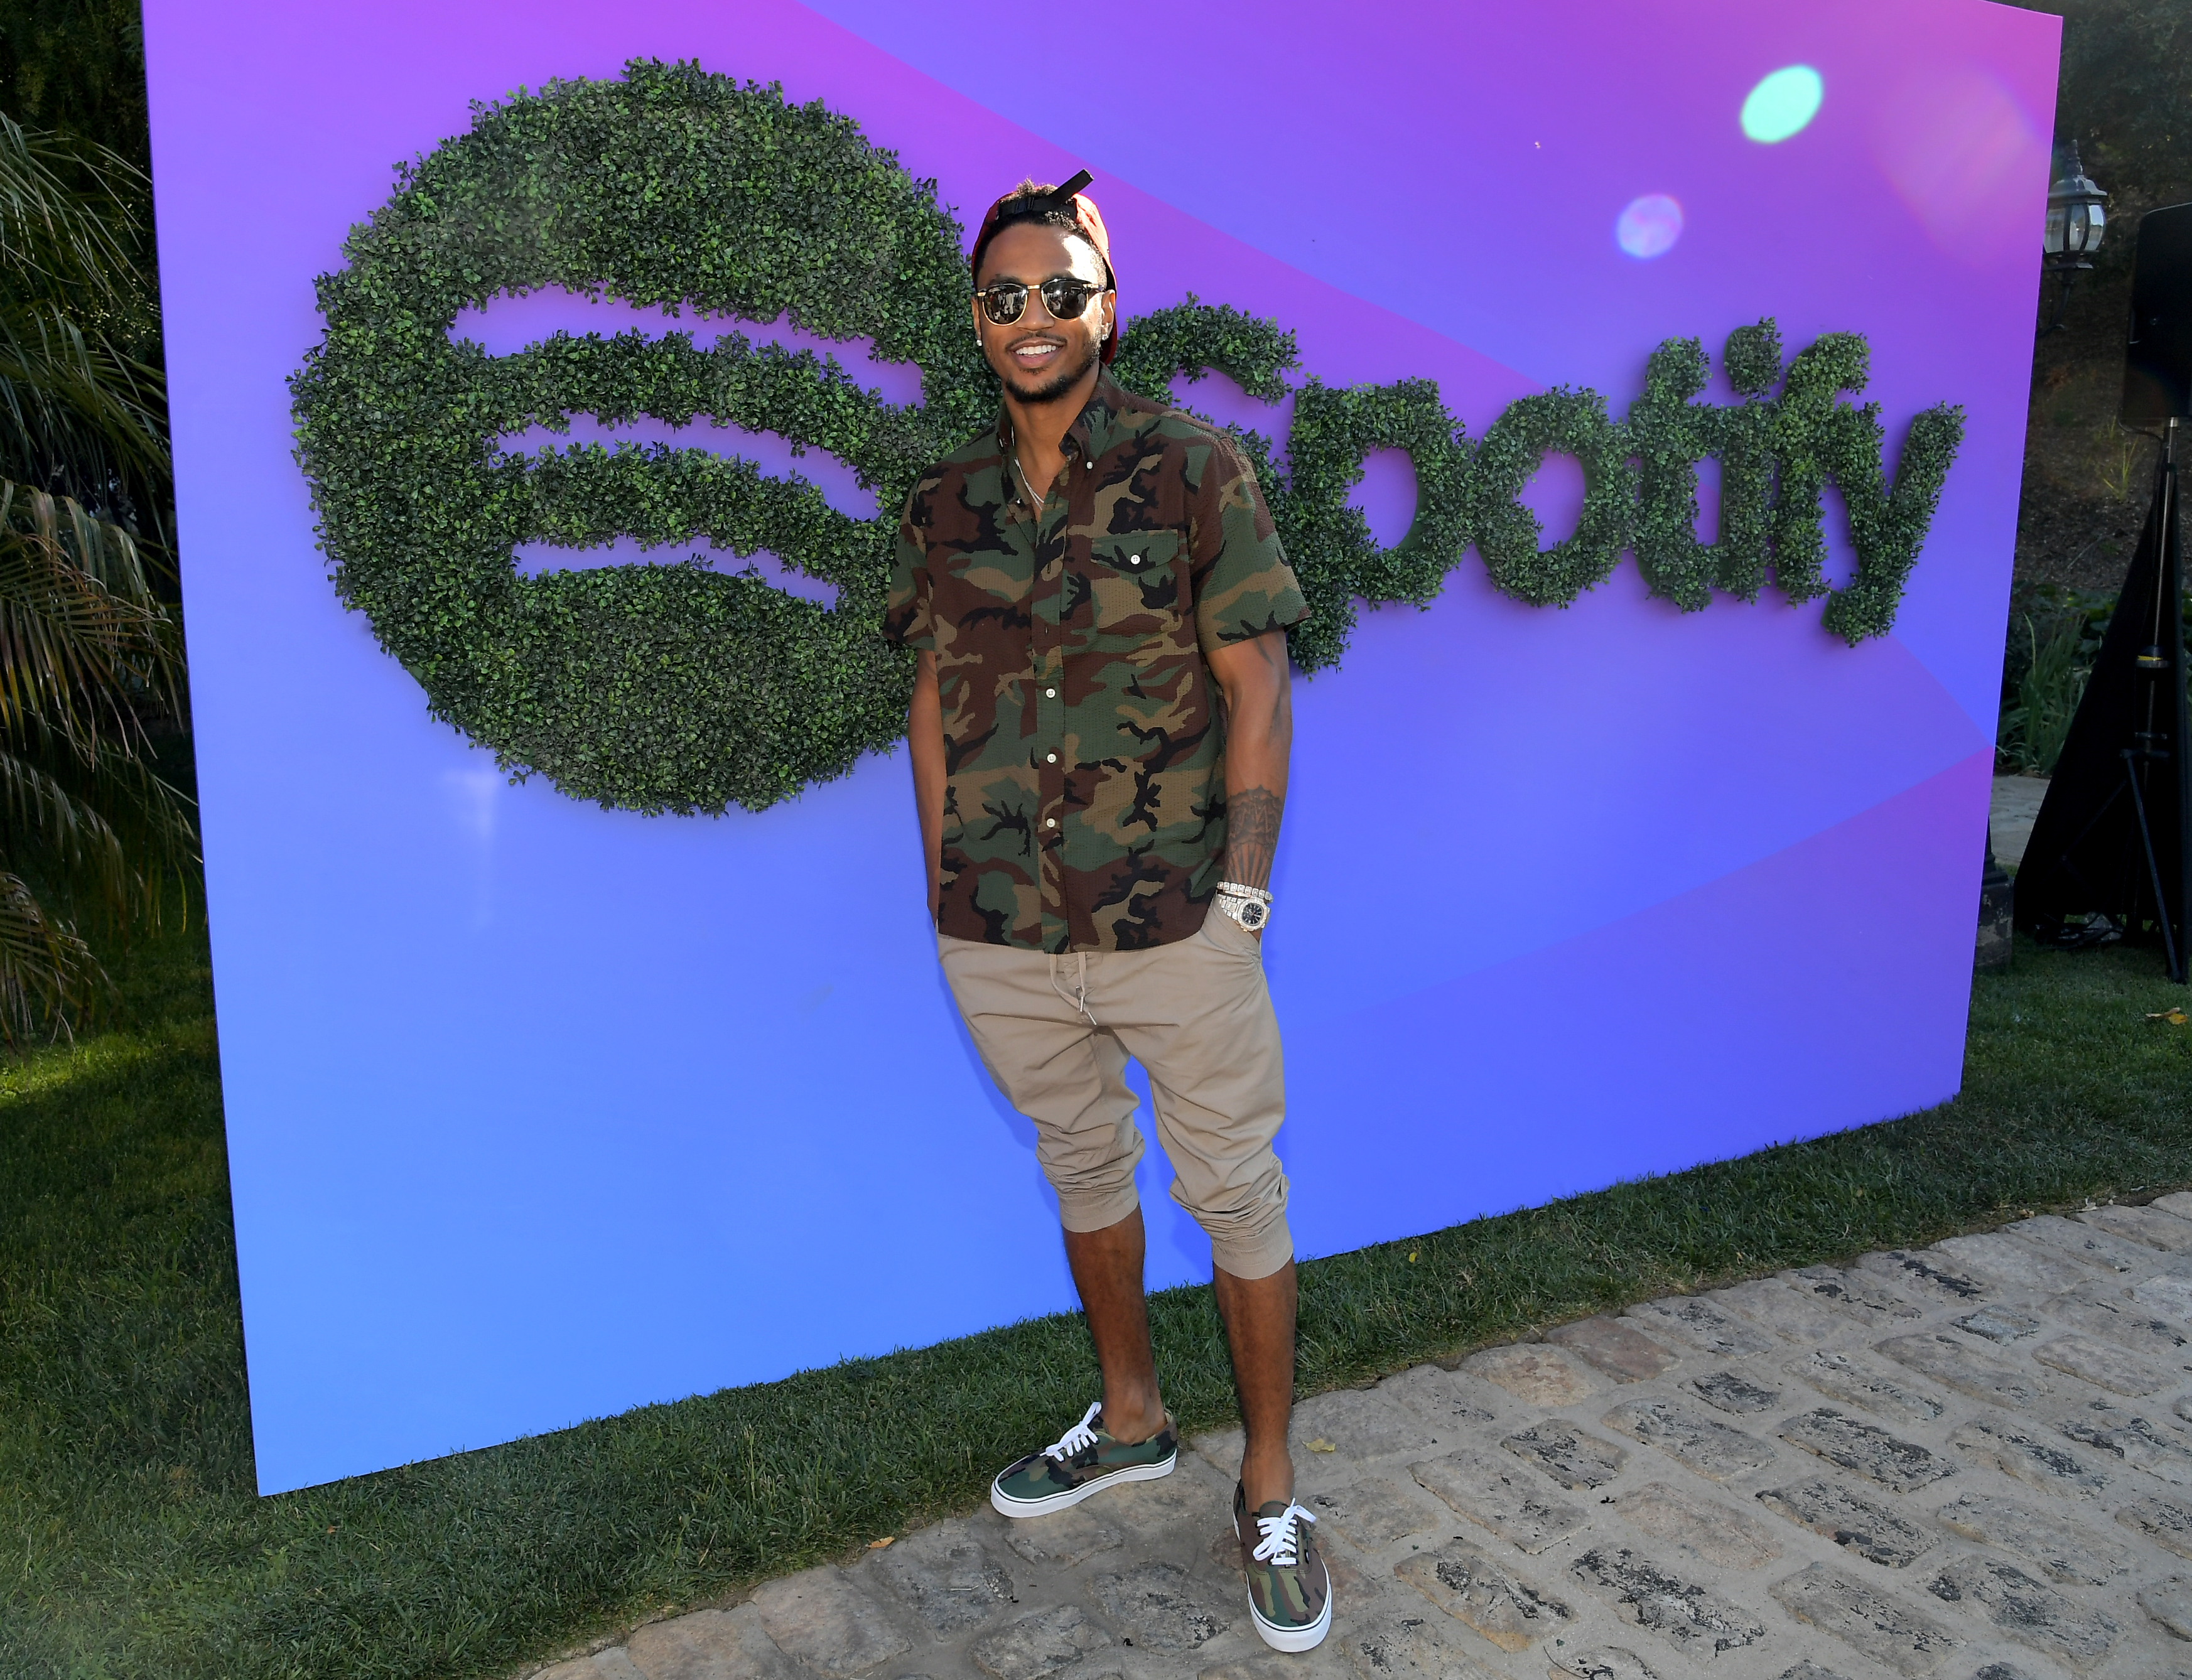 Trey Songz at the Spotify Cookout Party